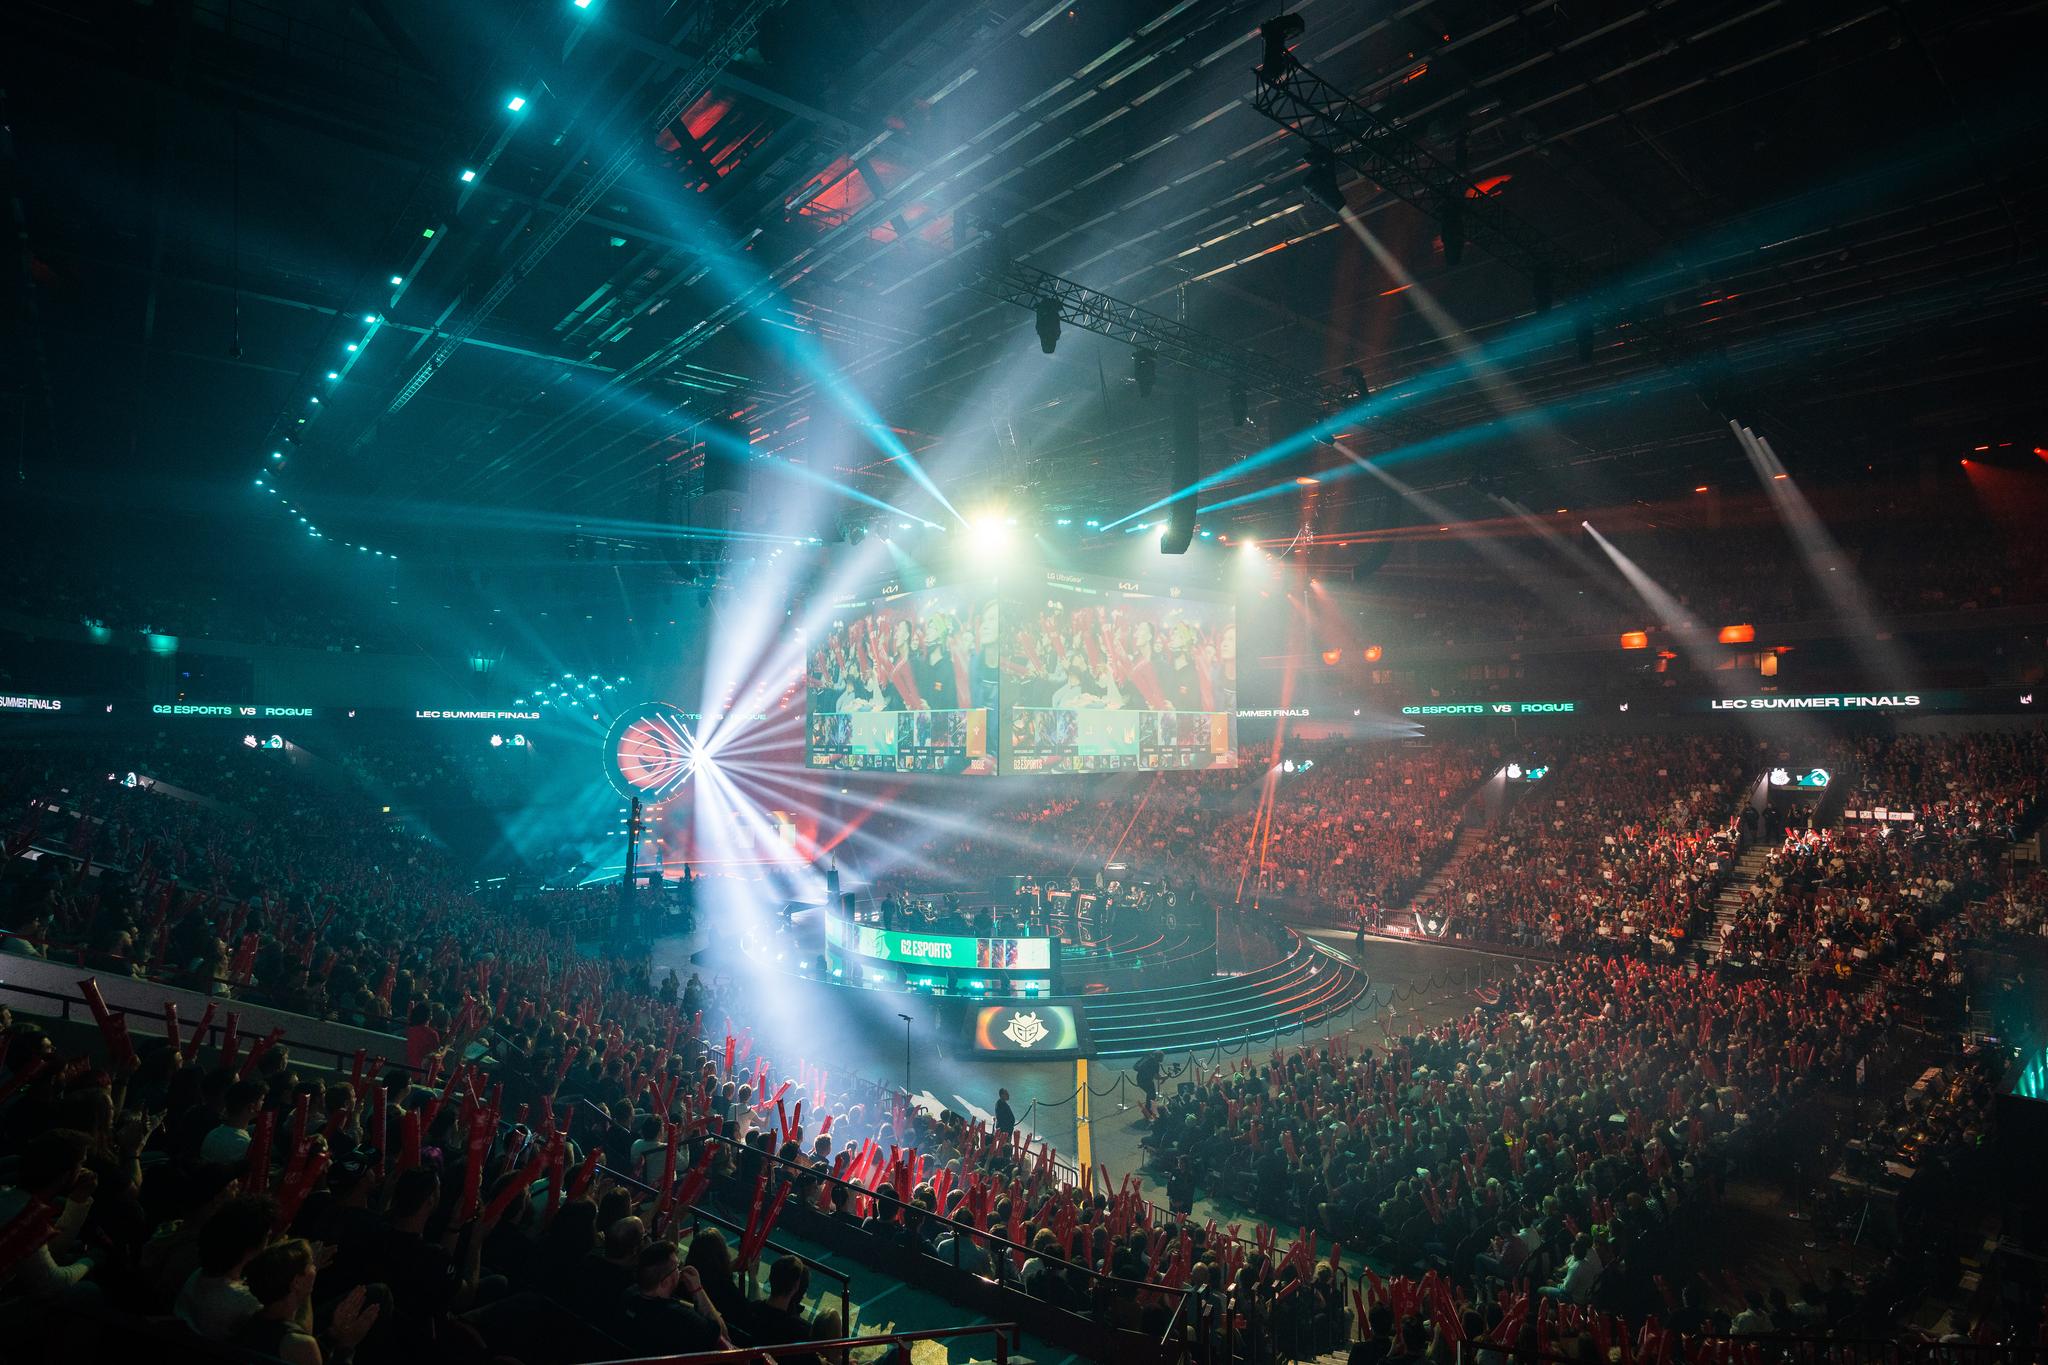 A wide shot of a full arena during the LEC opening ceremony.